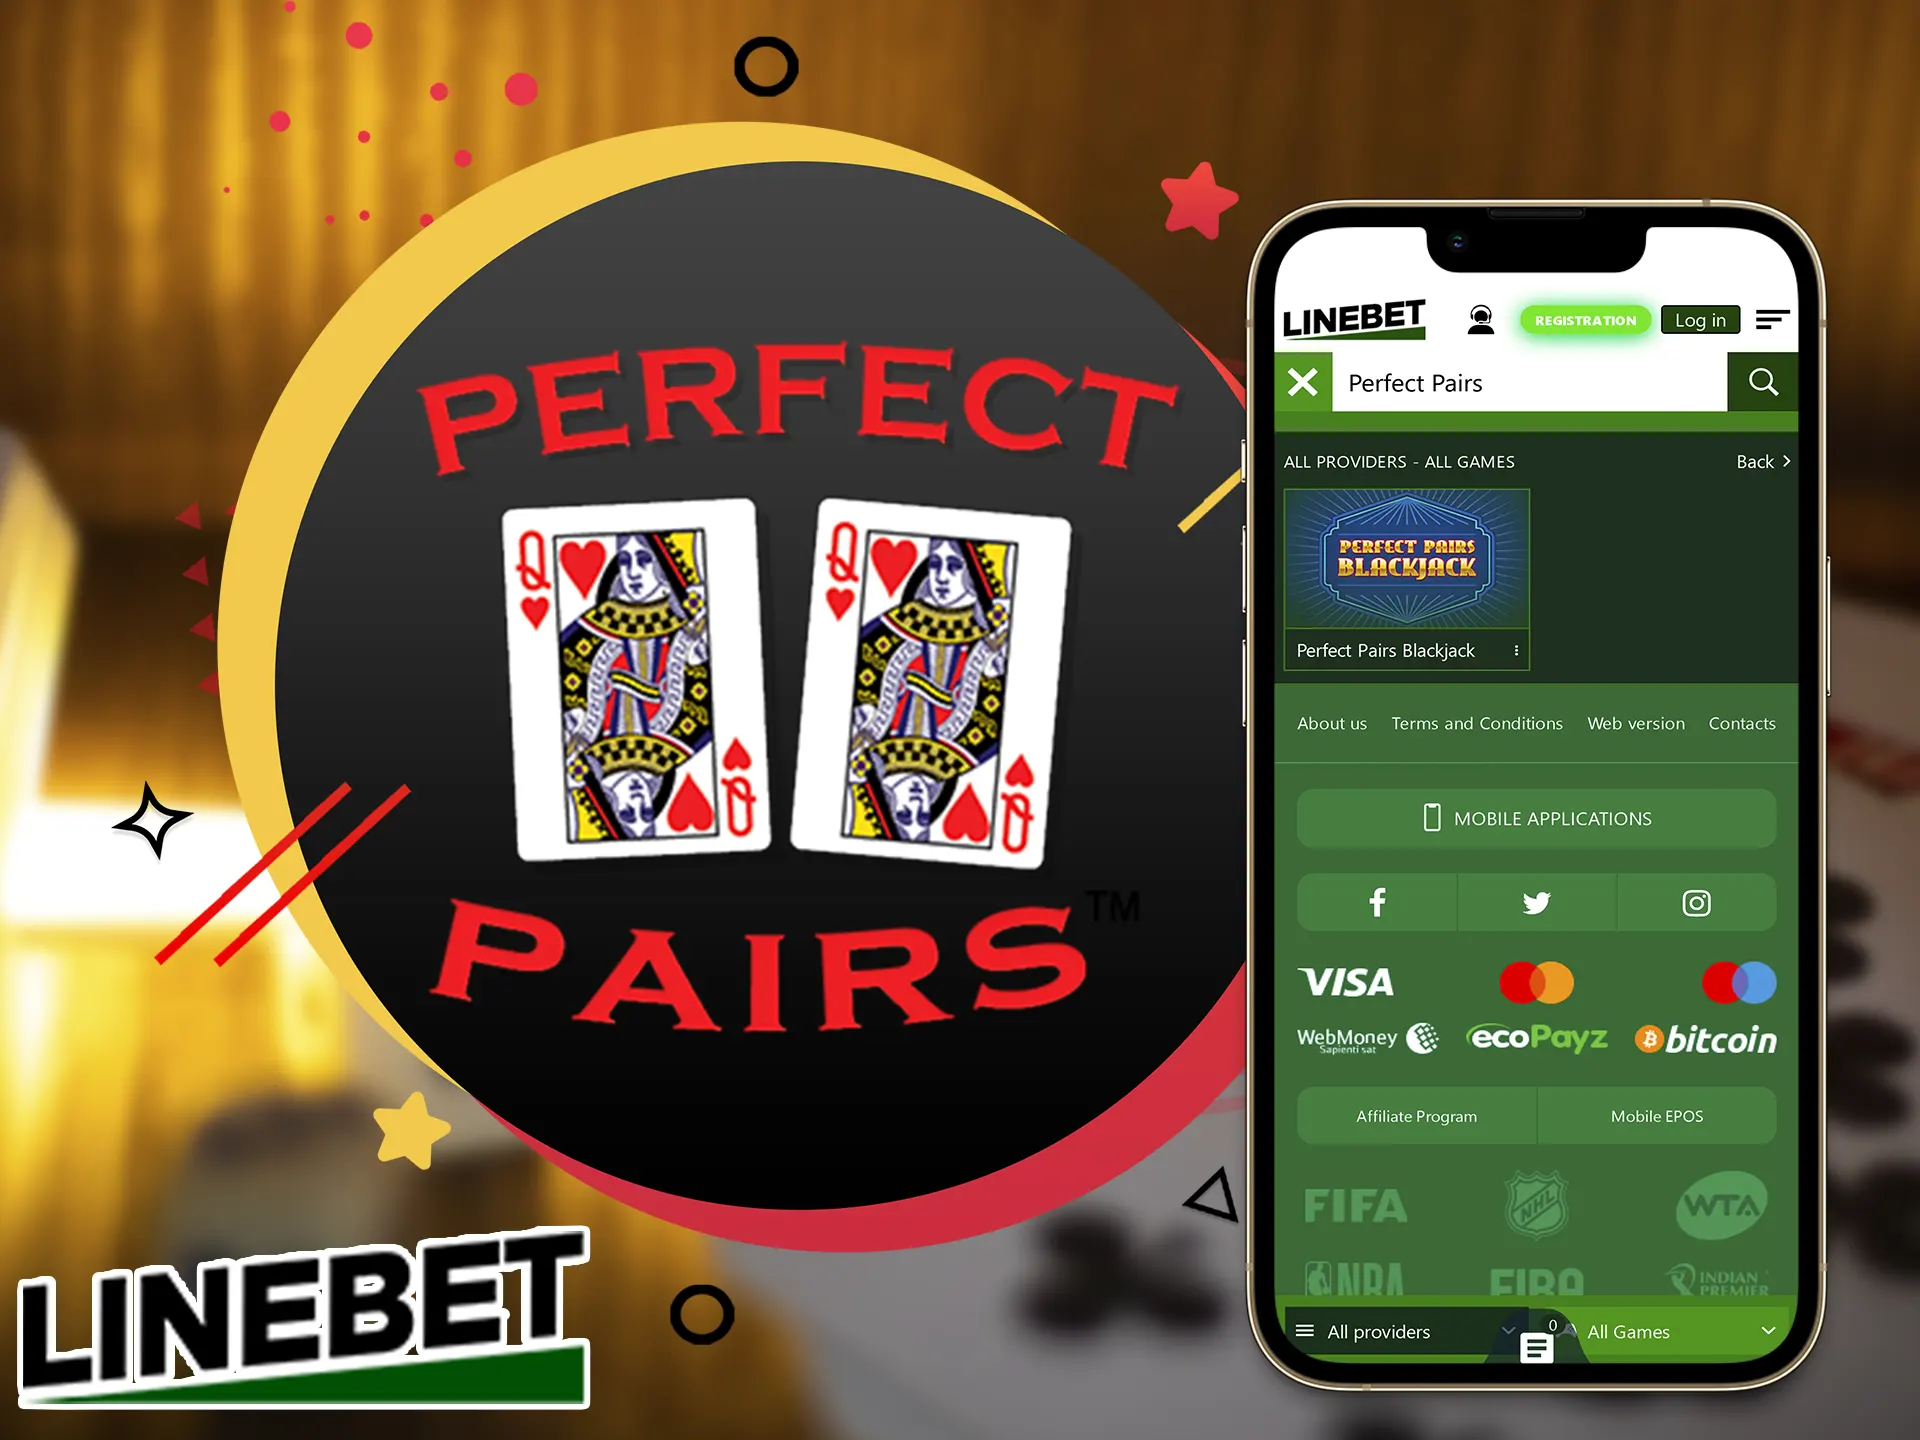 This game is based on the same + additional bets that players have to make, which can be different; we will explain more about this kind of Linebet game in this article.